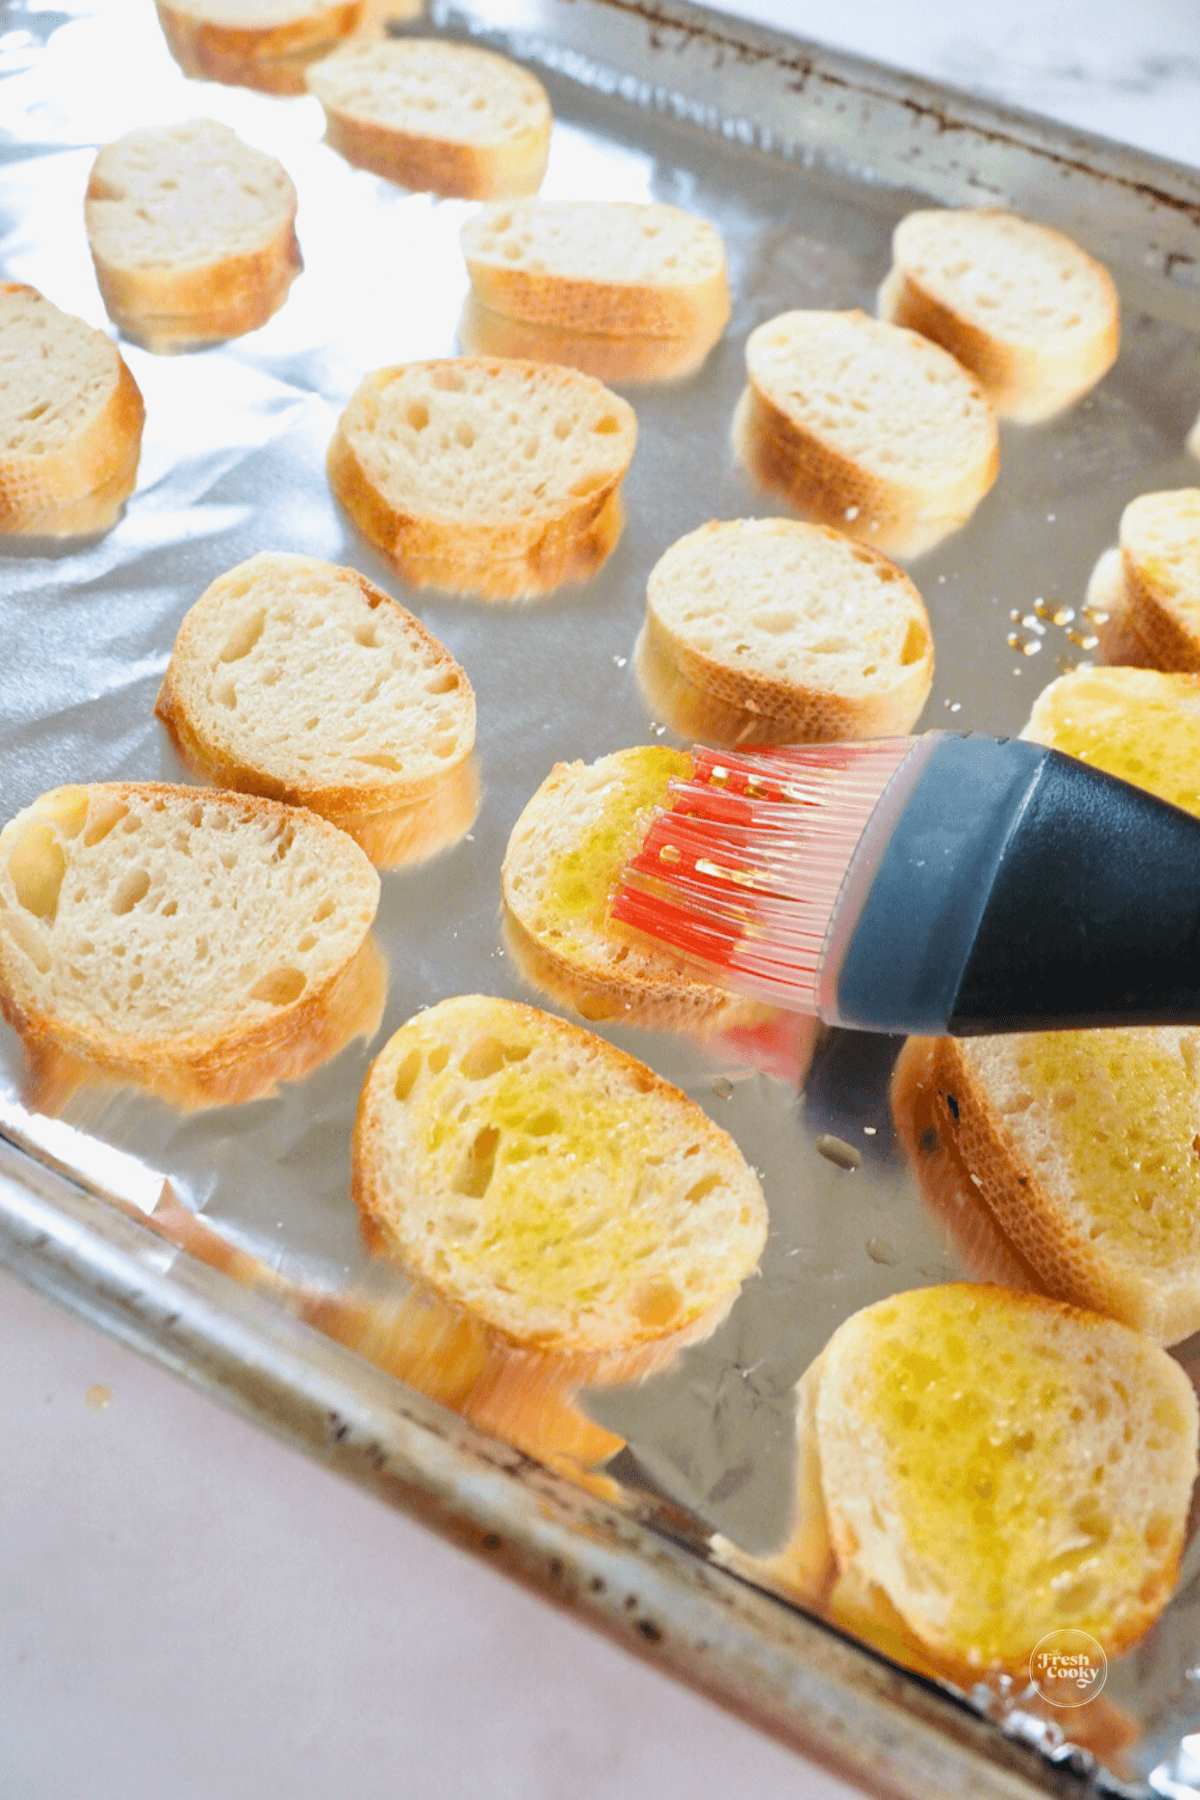 Brush baguette slices with olive oil. 